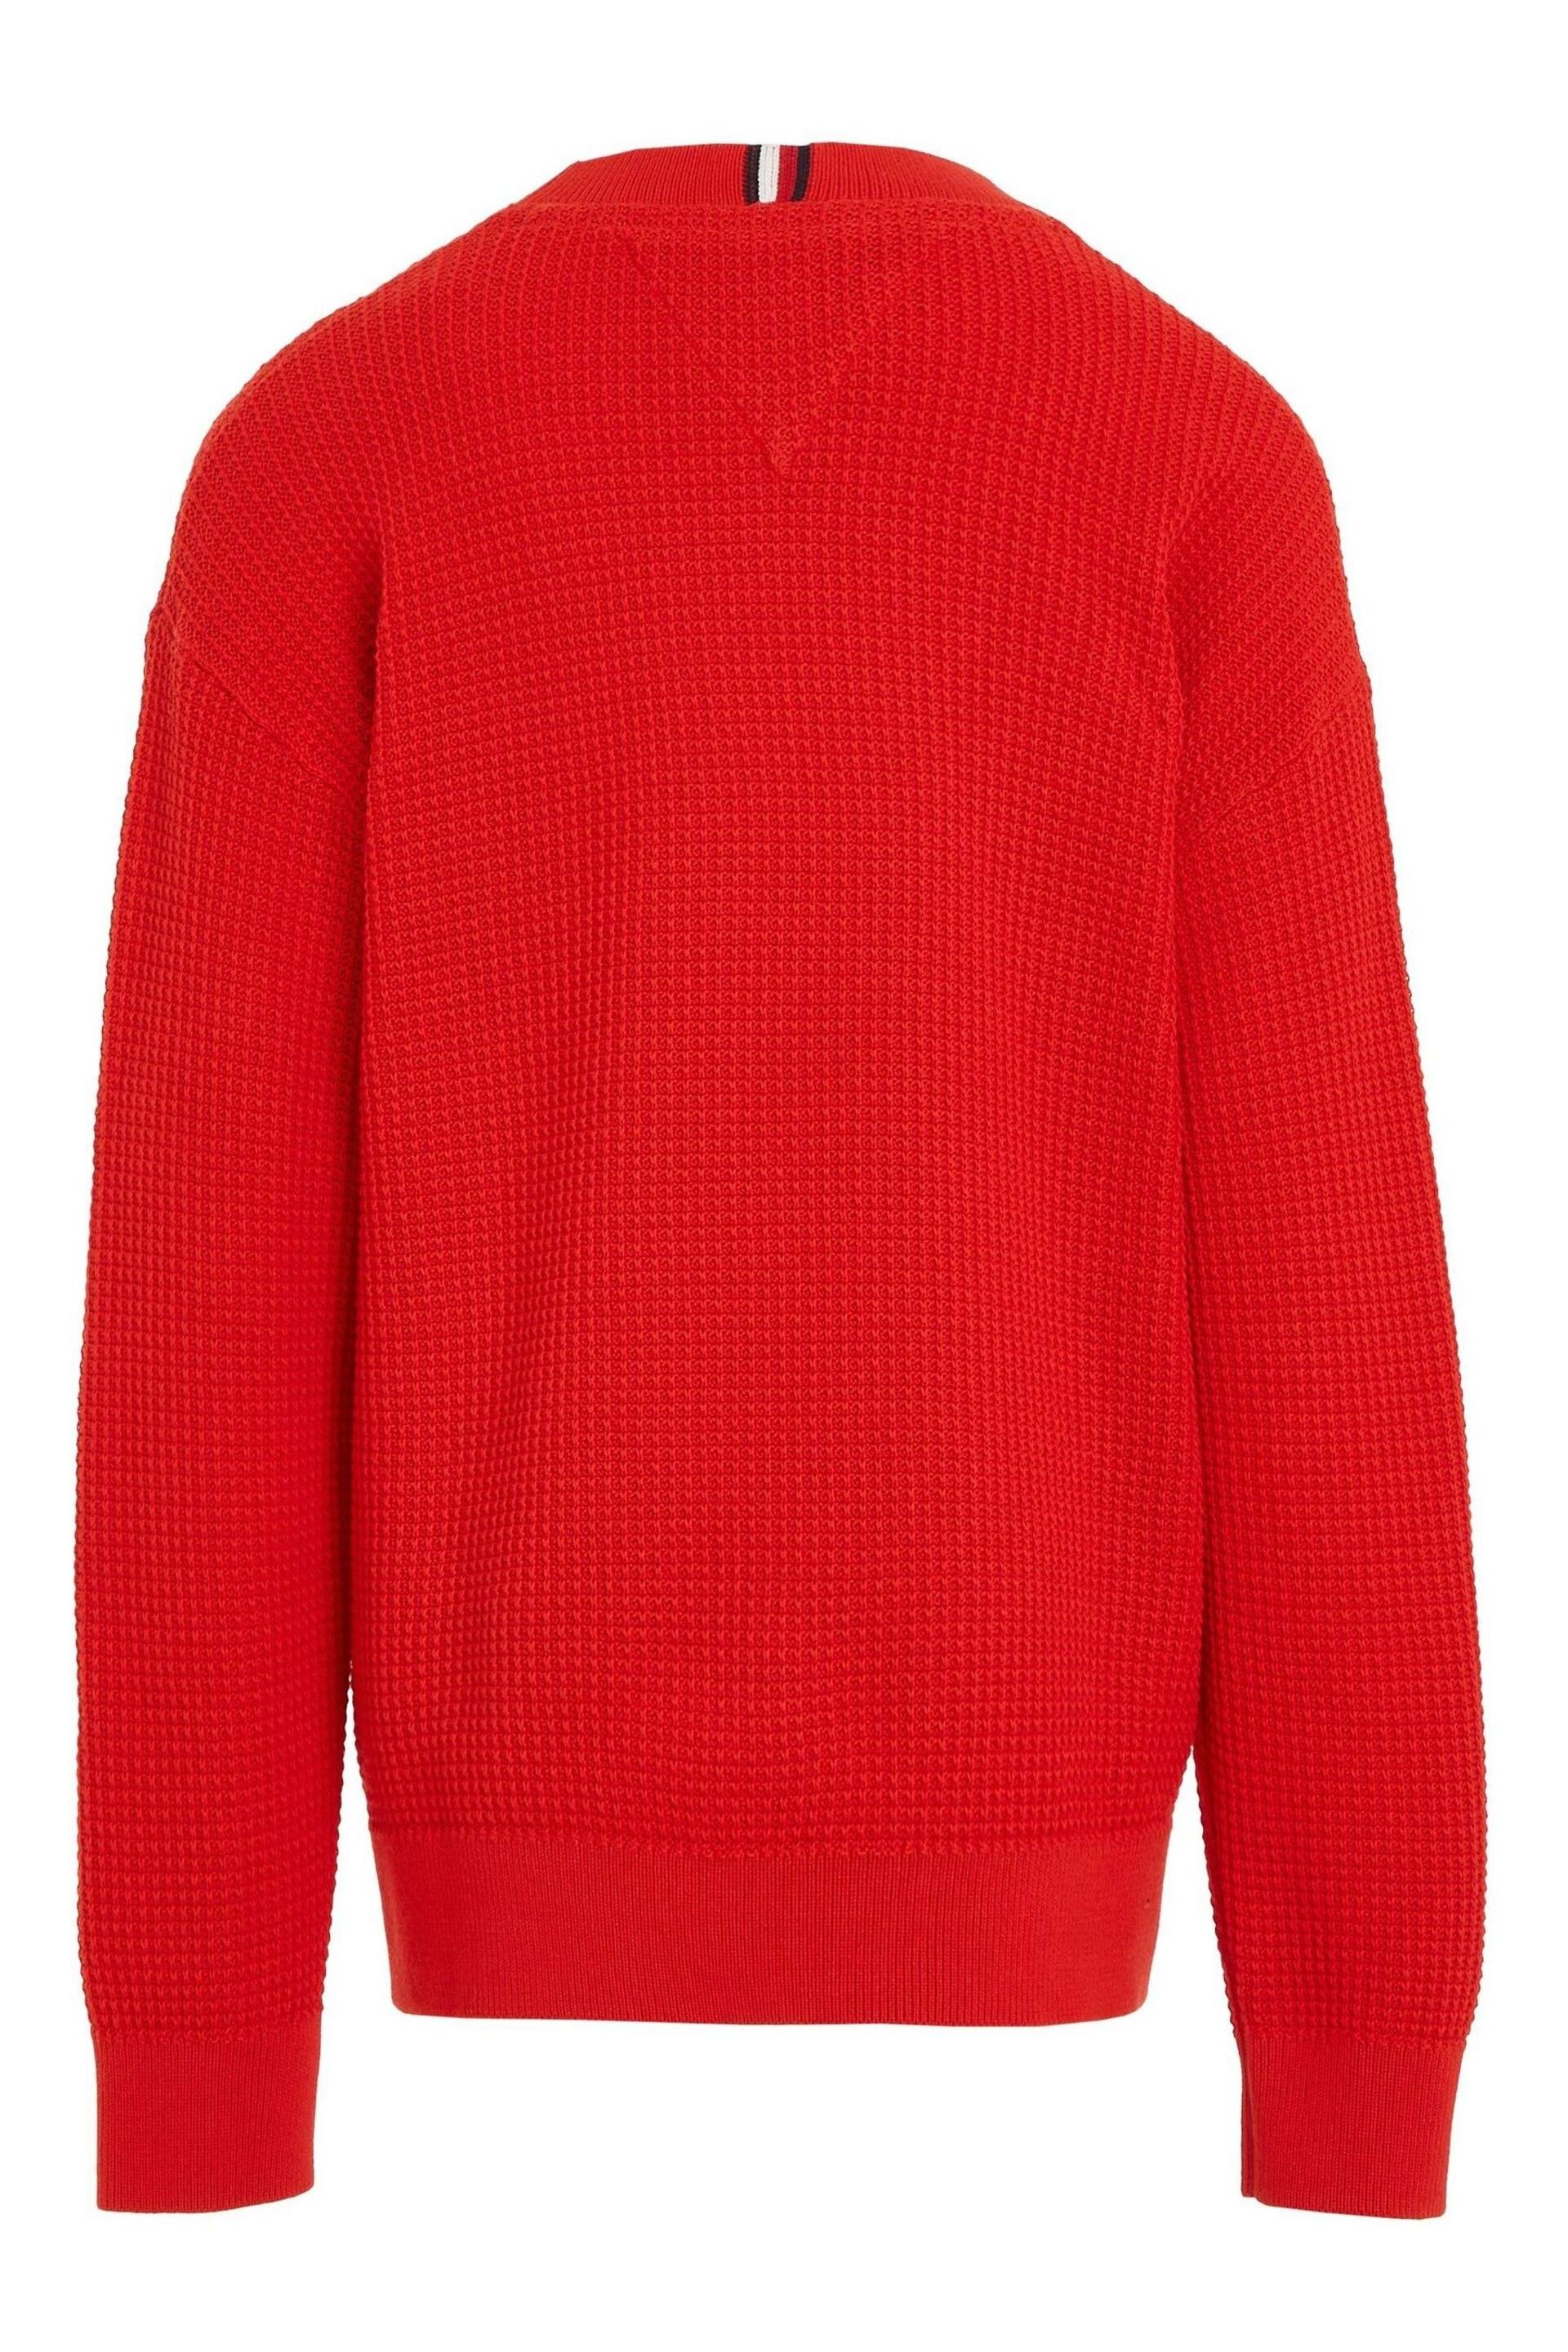 Tommy Hilfiger Essential Sweater - Image 5 of 6